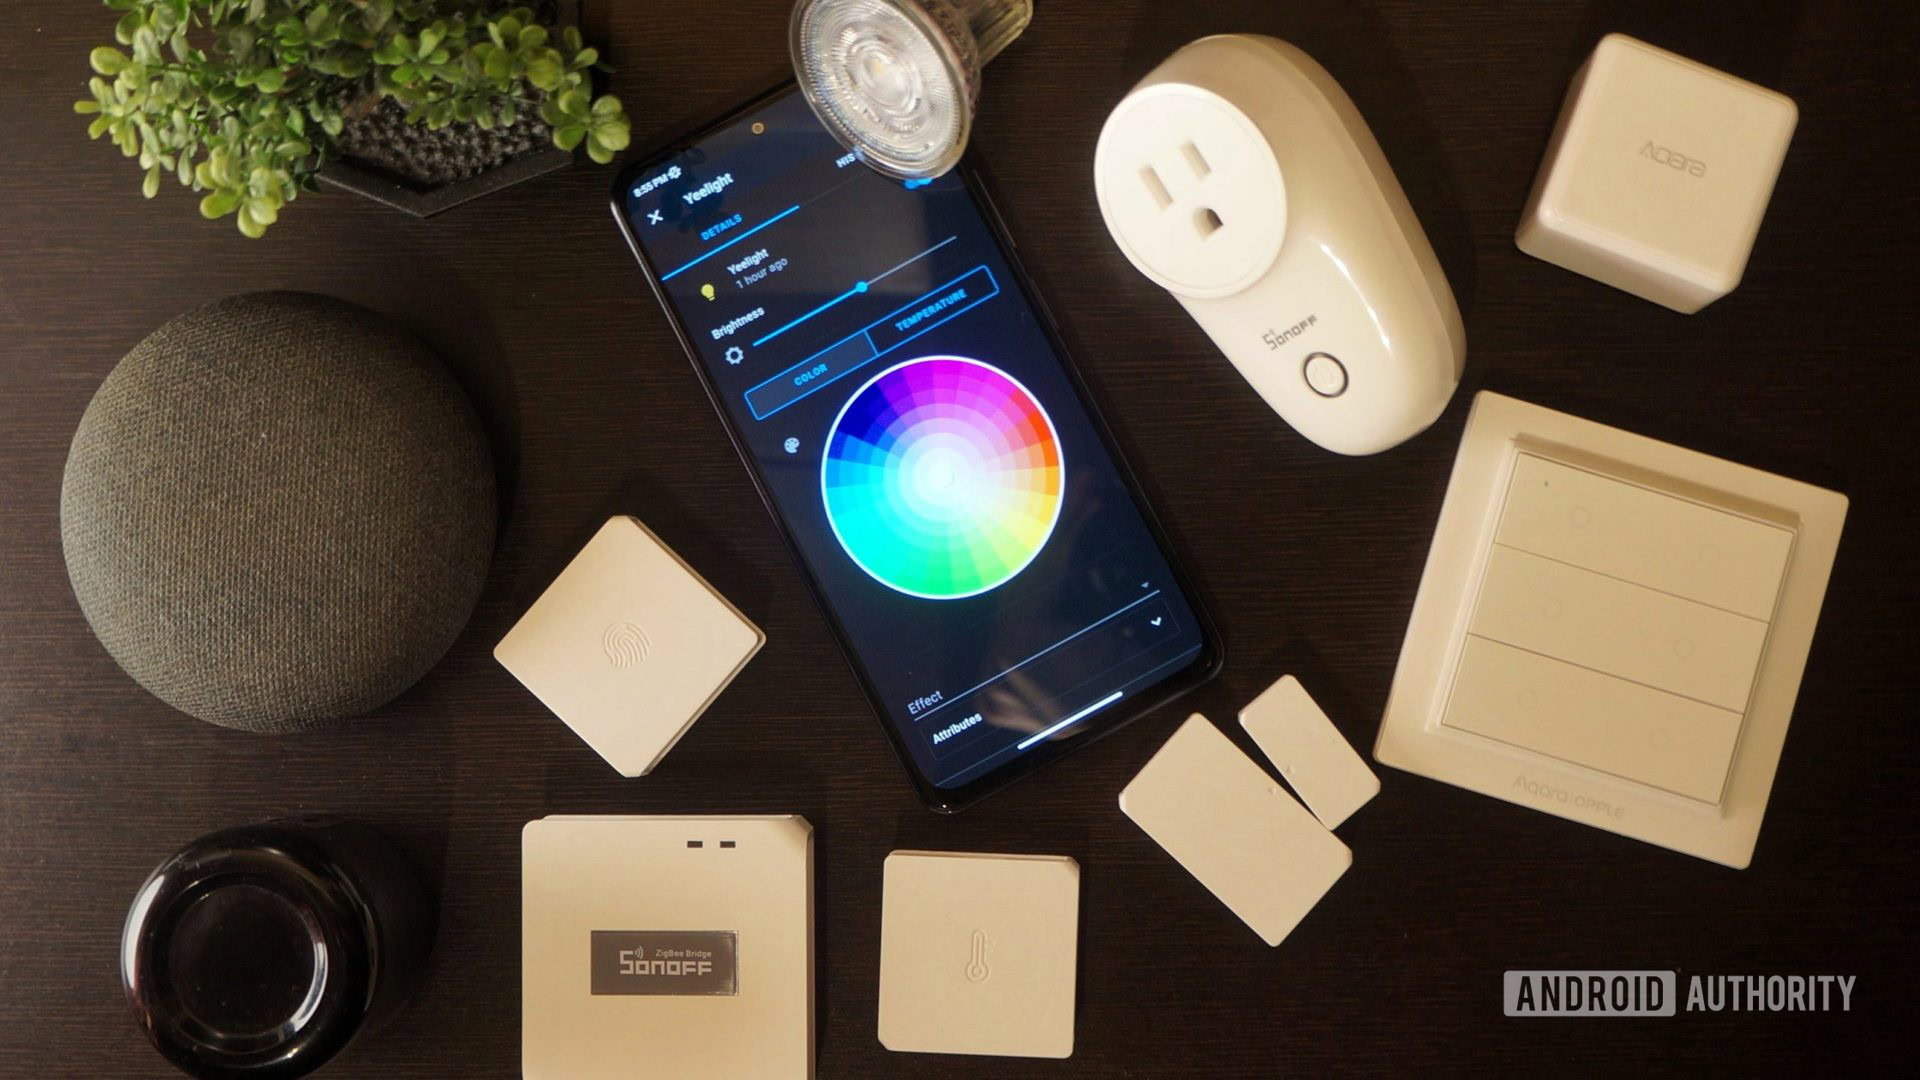 HomeKit remains a scattered ecosystem years after it launched